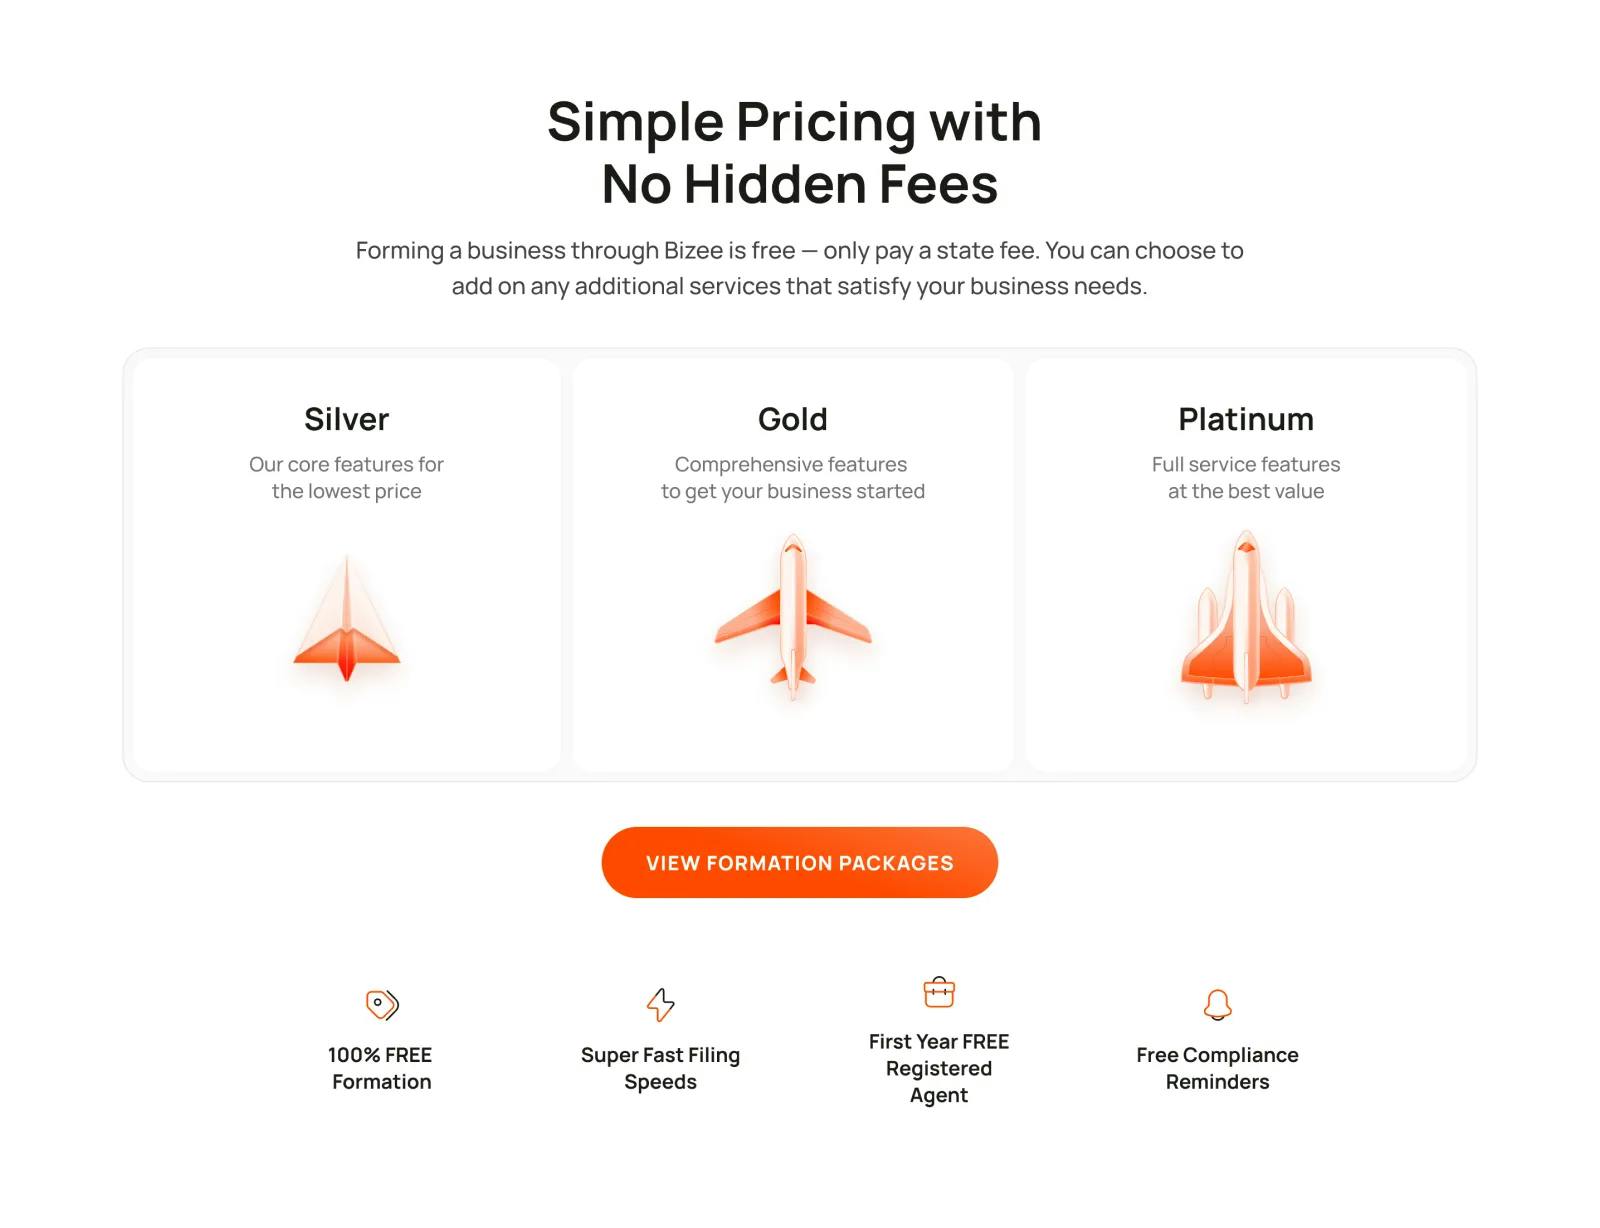 Pricing plans for Bizee